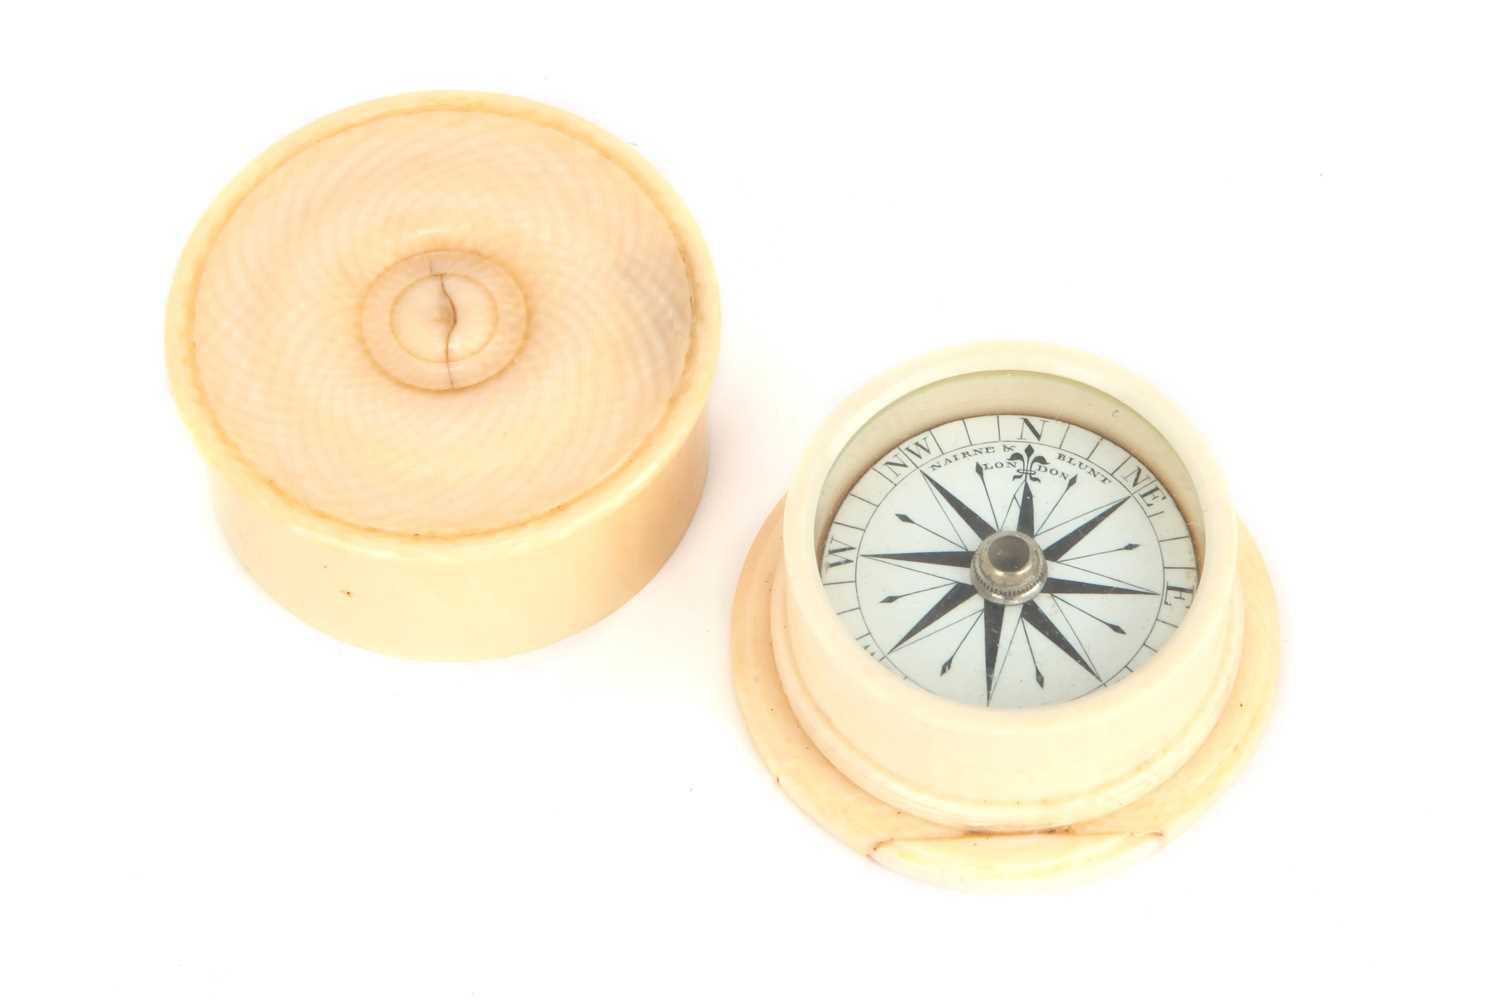 Lot 71 - An Ivory-mounted Compass by Nairne & Blunt